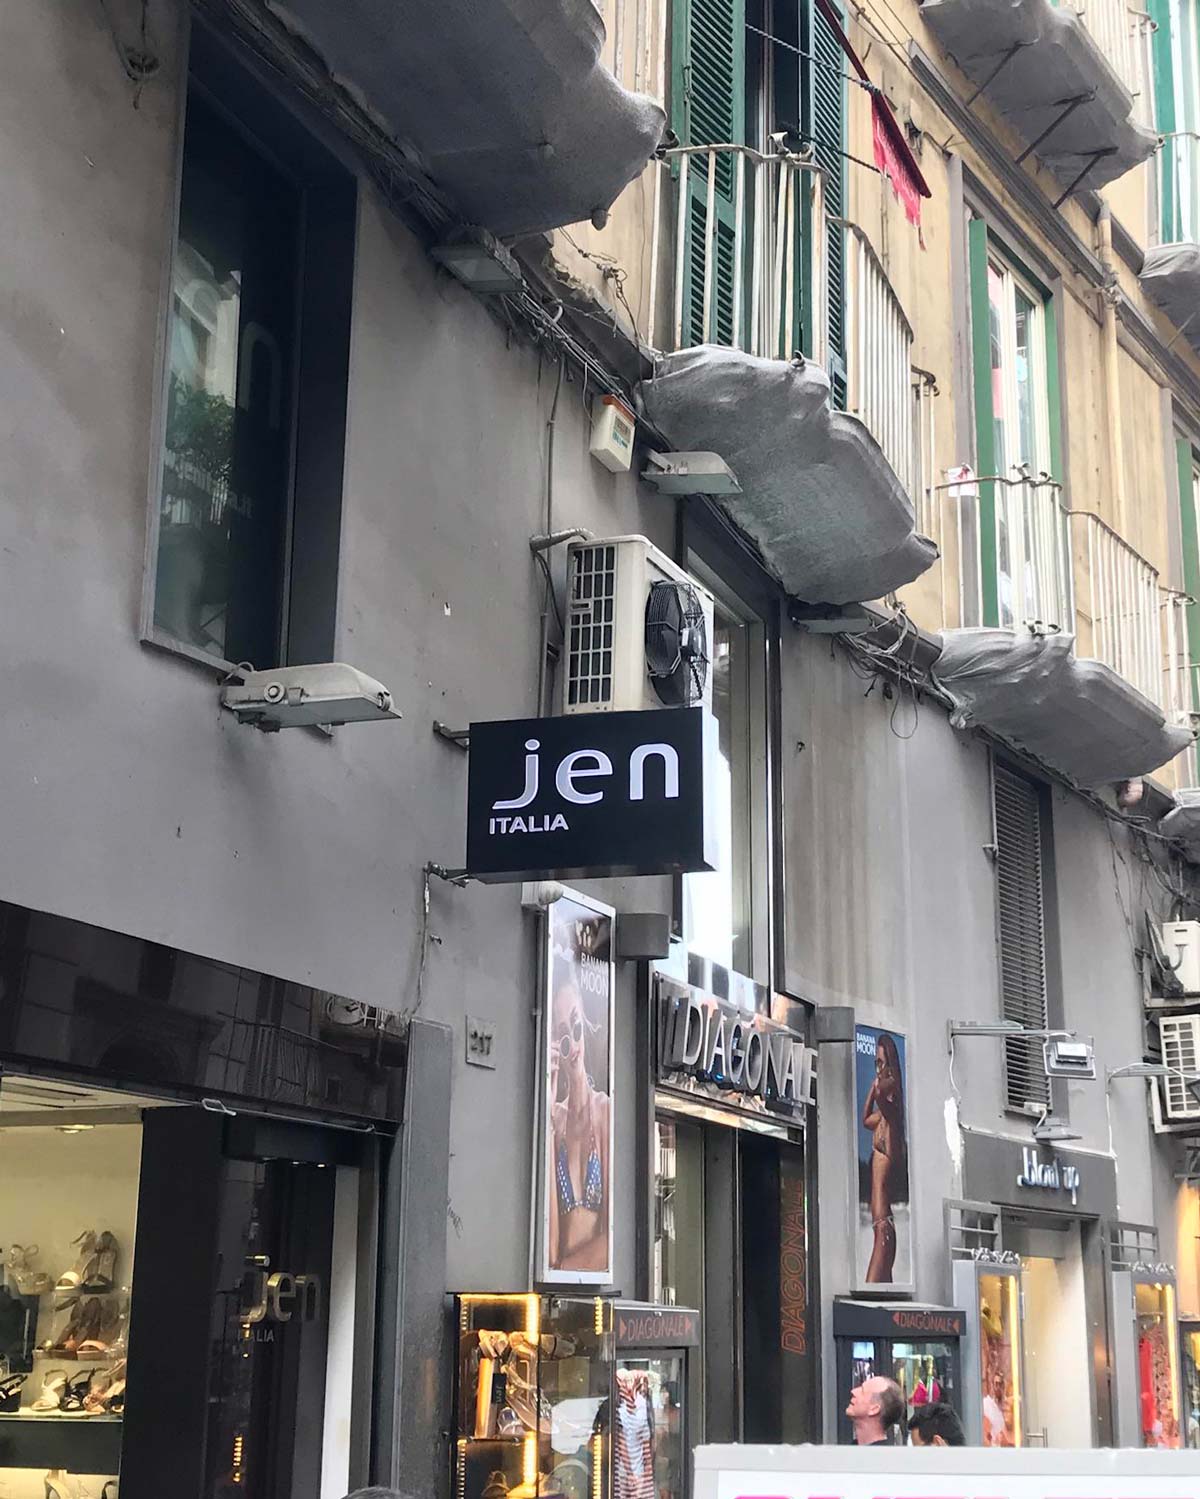 The name of this store